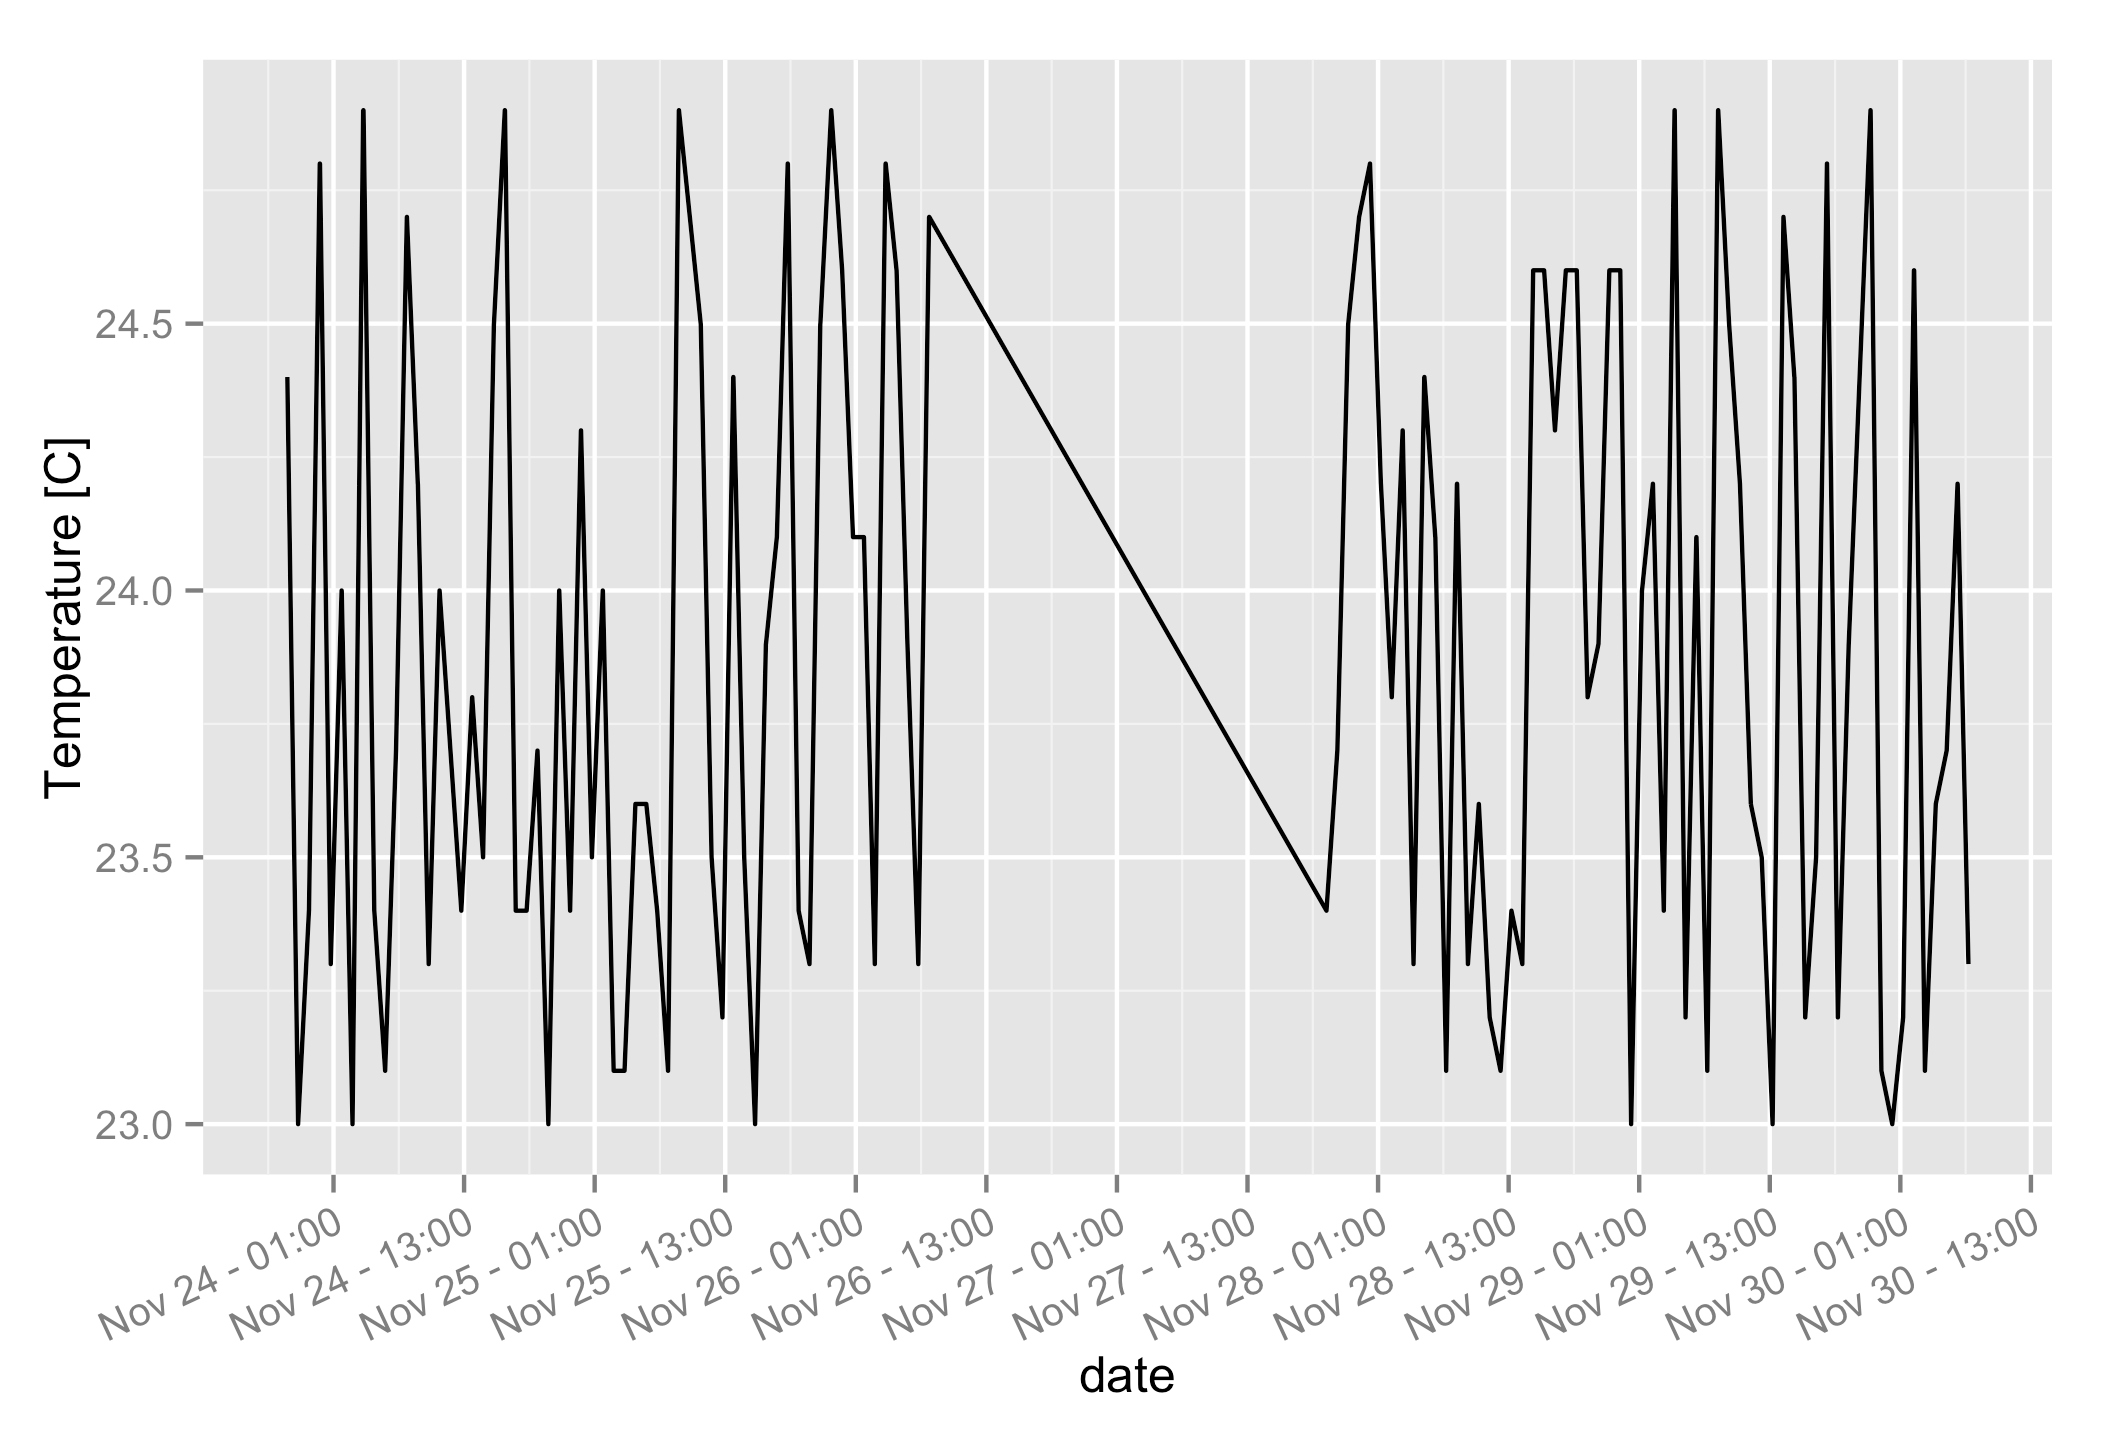 How To Change The Number Of Breaks On A Datetime Axis With R And Ggplot2 By Douglas Watson Towards Data Science